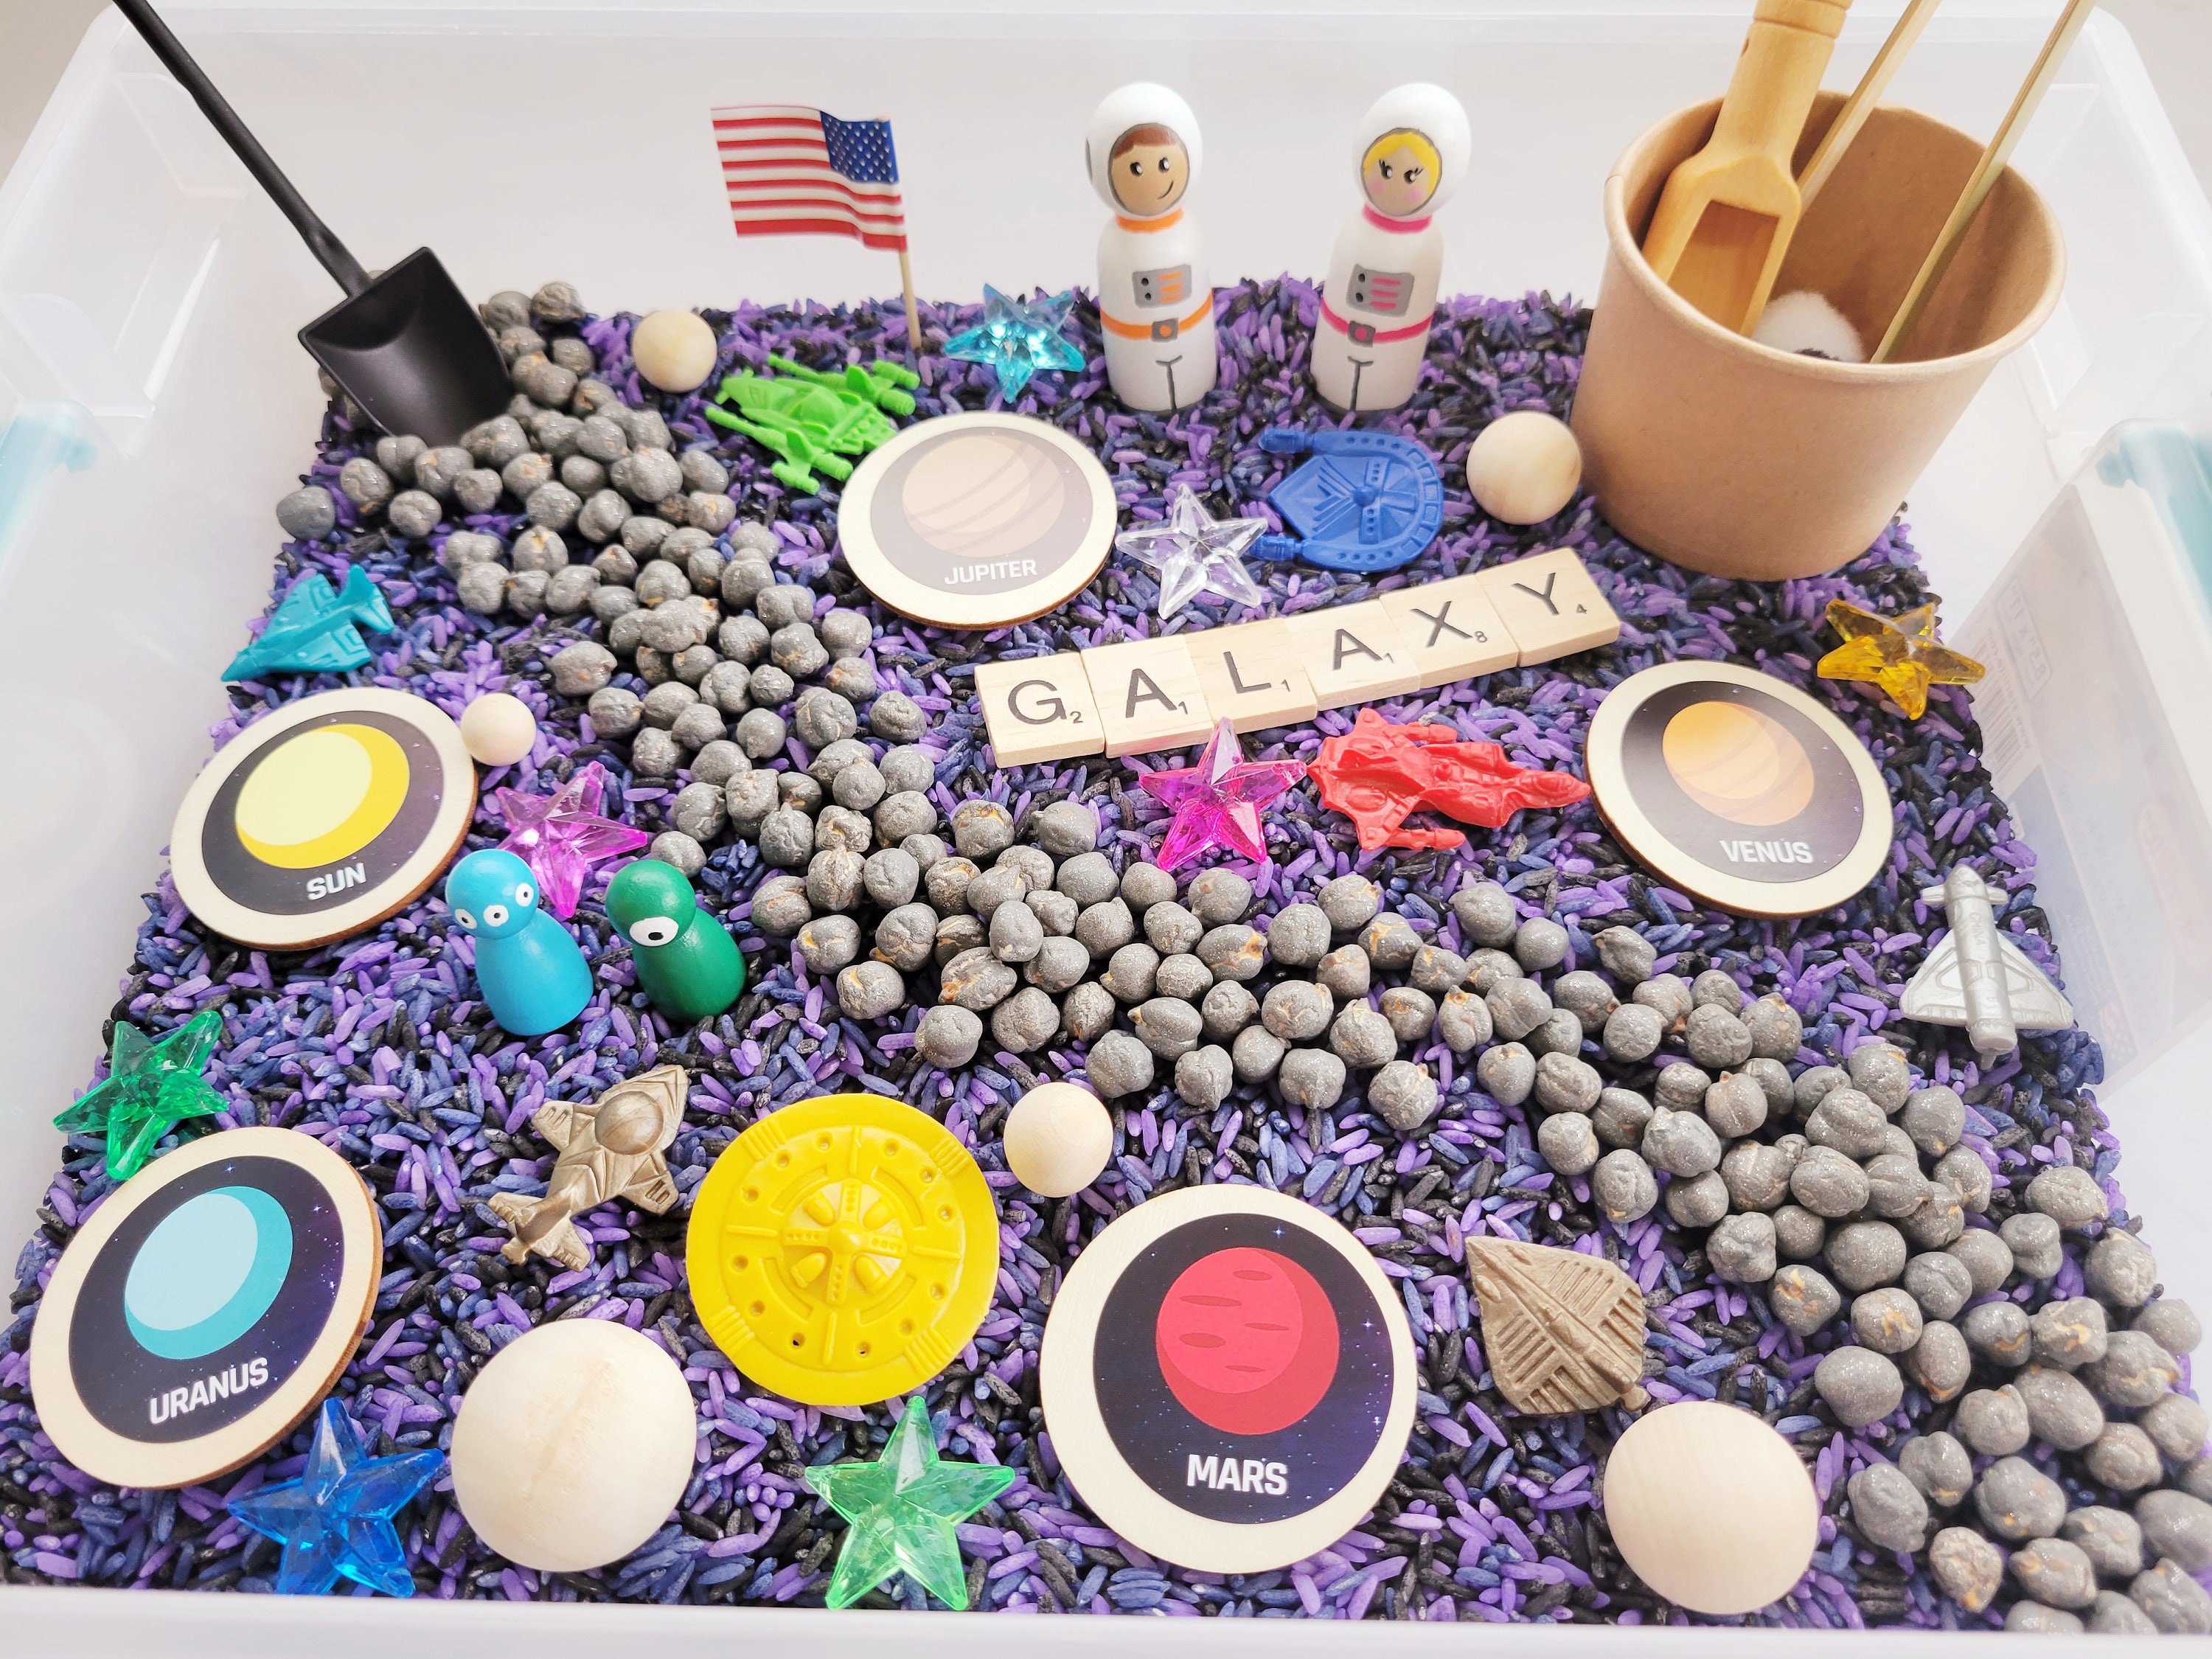 Space Sensory Bin Kit/small World Play/sensory Tray/loose Parts  Play/astronaut Wood Peg Doll/imaginative Play Kit/open Ended Toy 